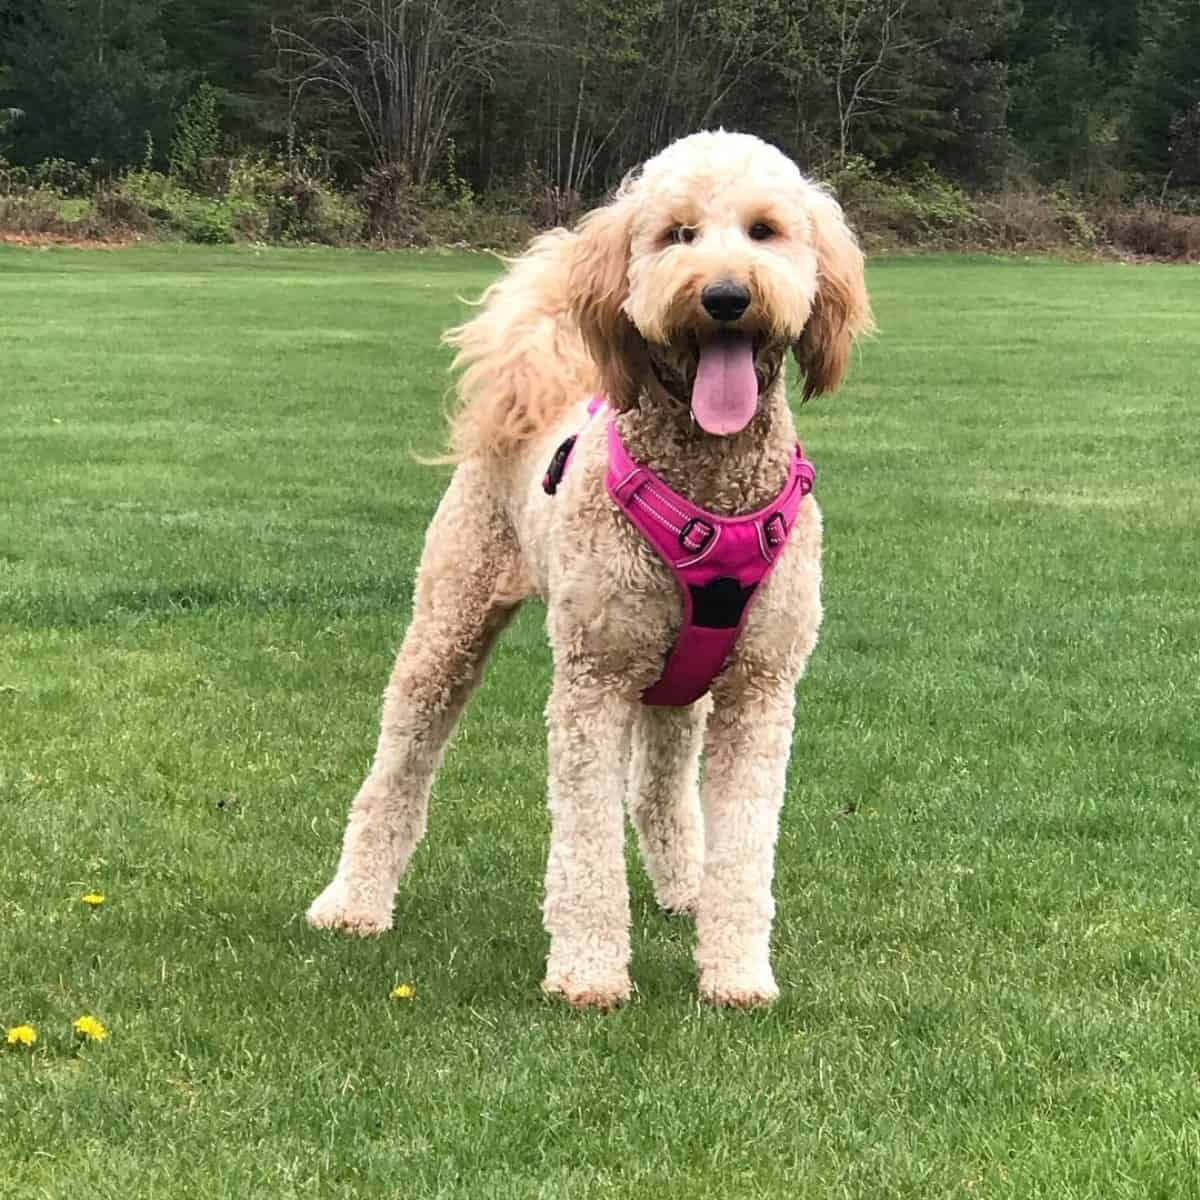 fresh haircut Goldendoodle ready for activities